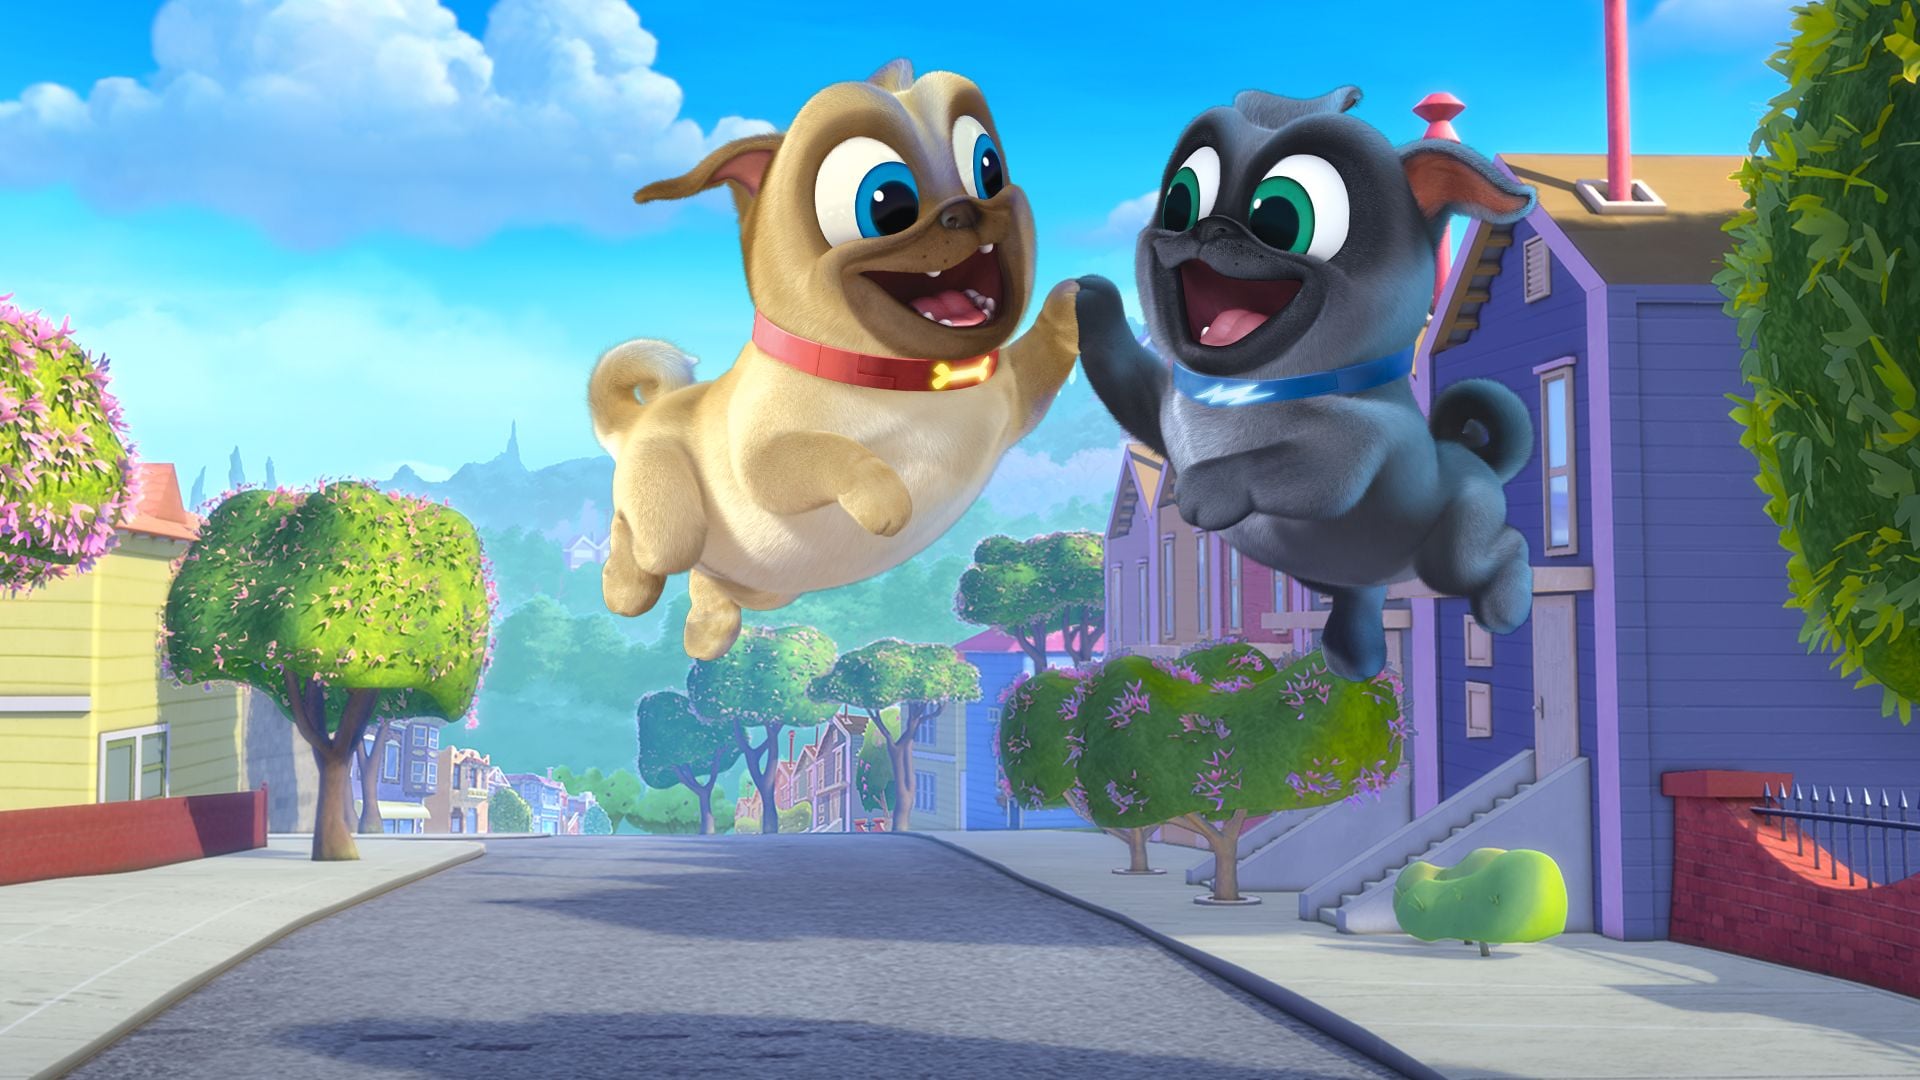 Puppy Dog Pals. From Nostalgic Shows to New Originals: More Than 100 Series For Kids to Stream on Disney+. POPSUGAR Family Photo 20